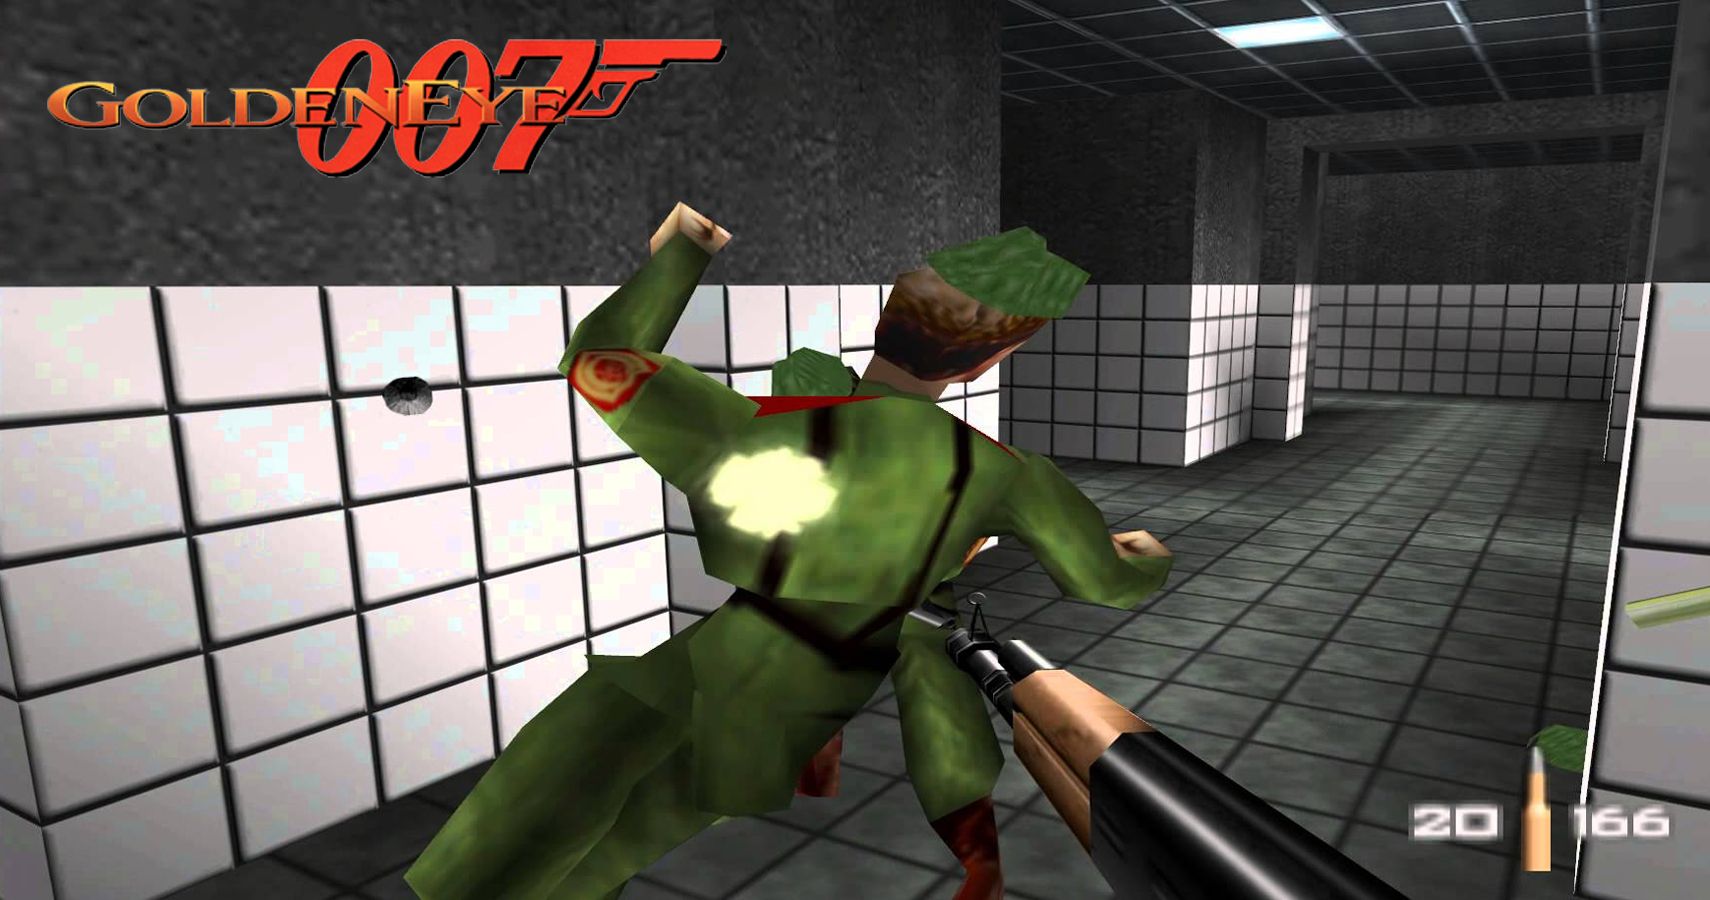 GoldenEye Surface 2 walkthrough, from communications link to the